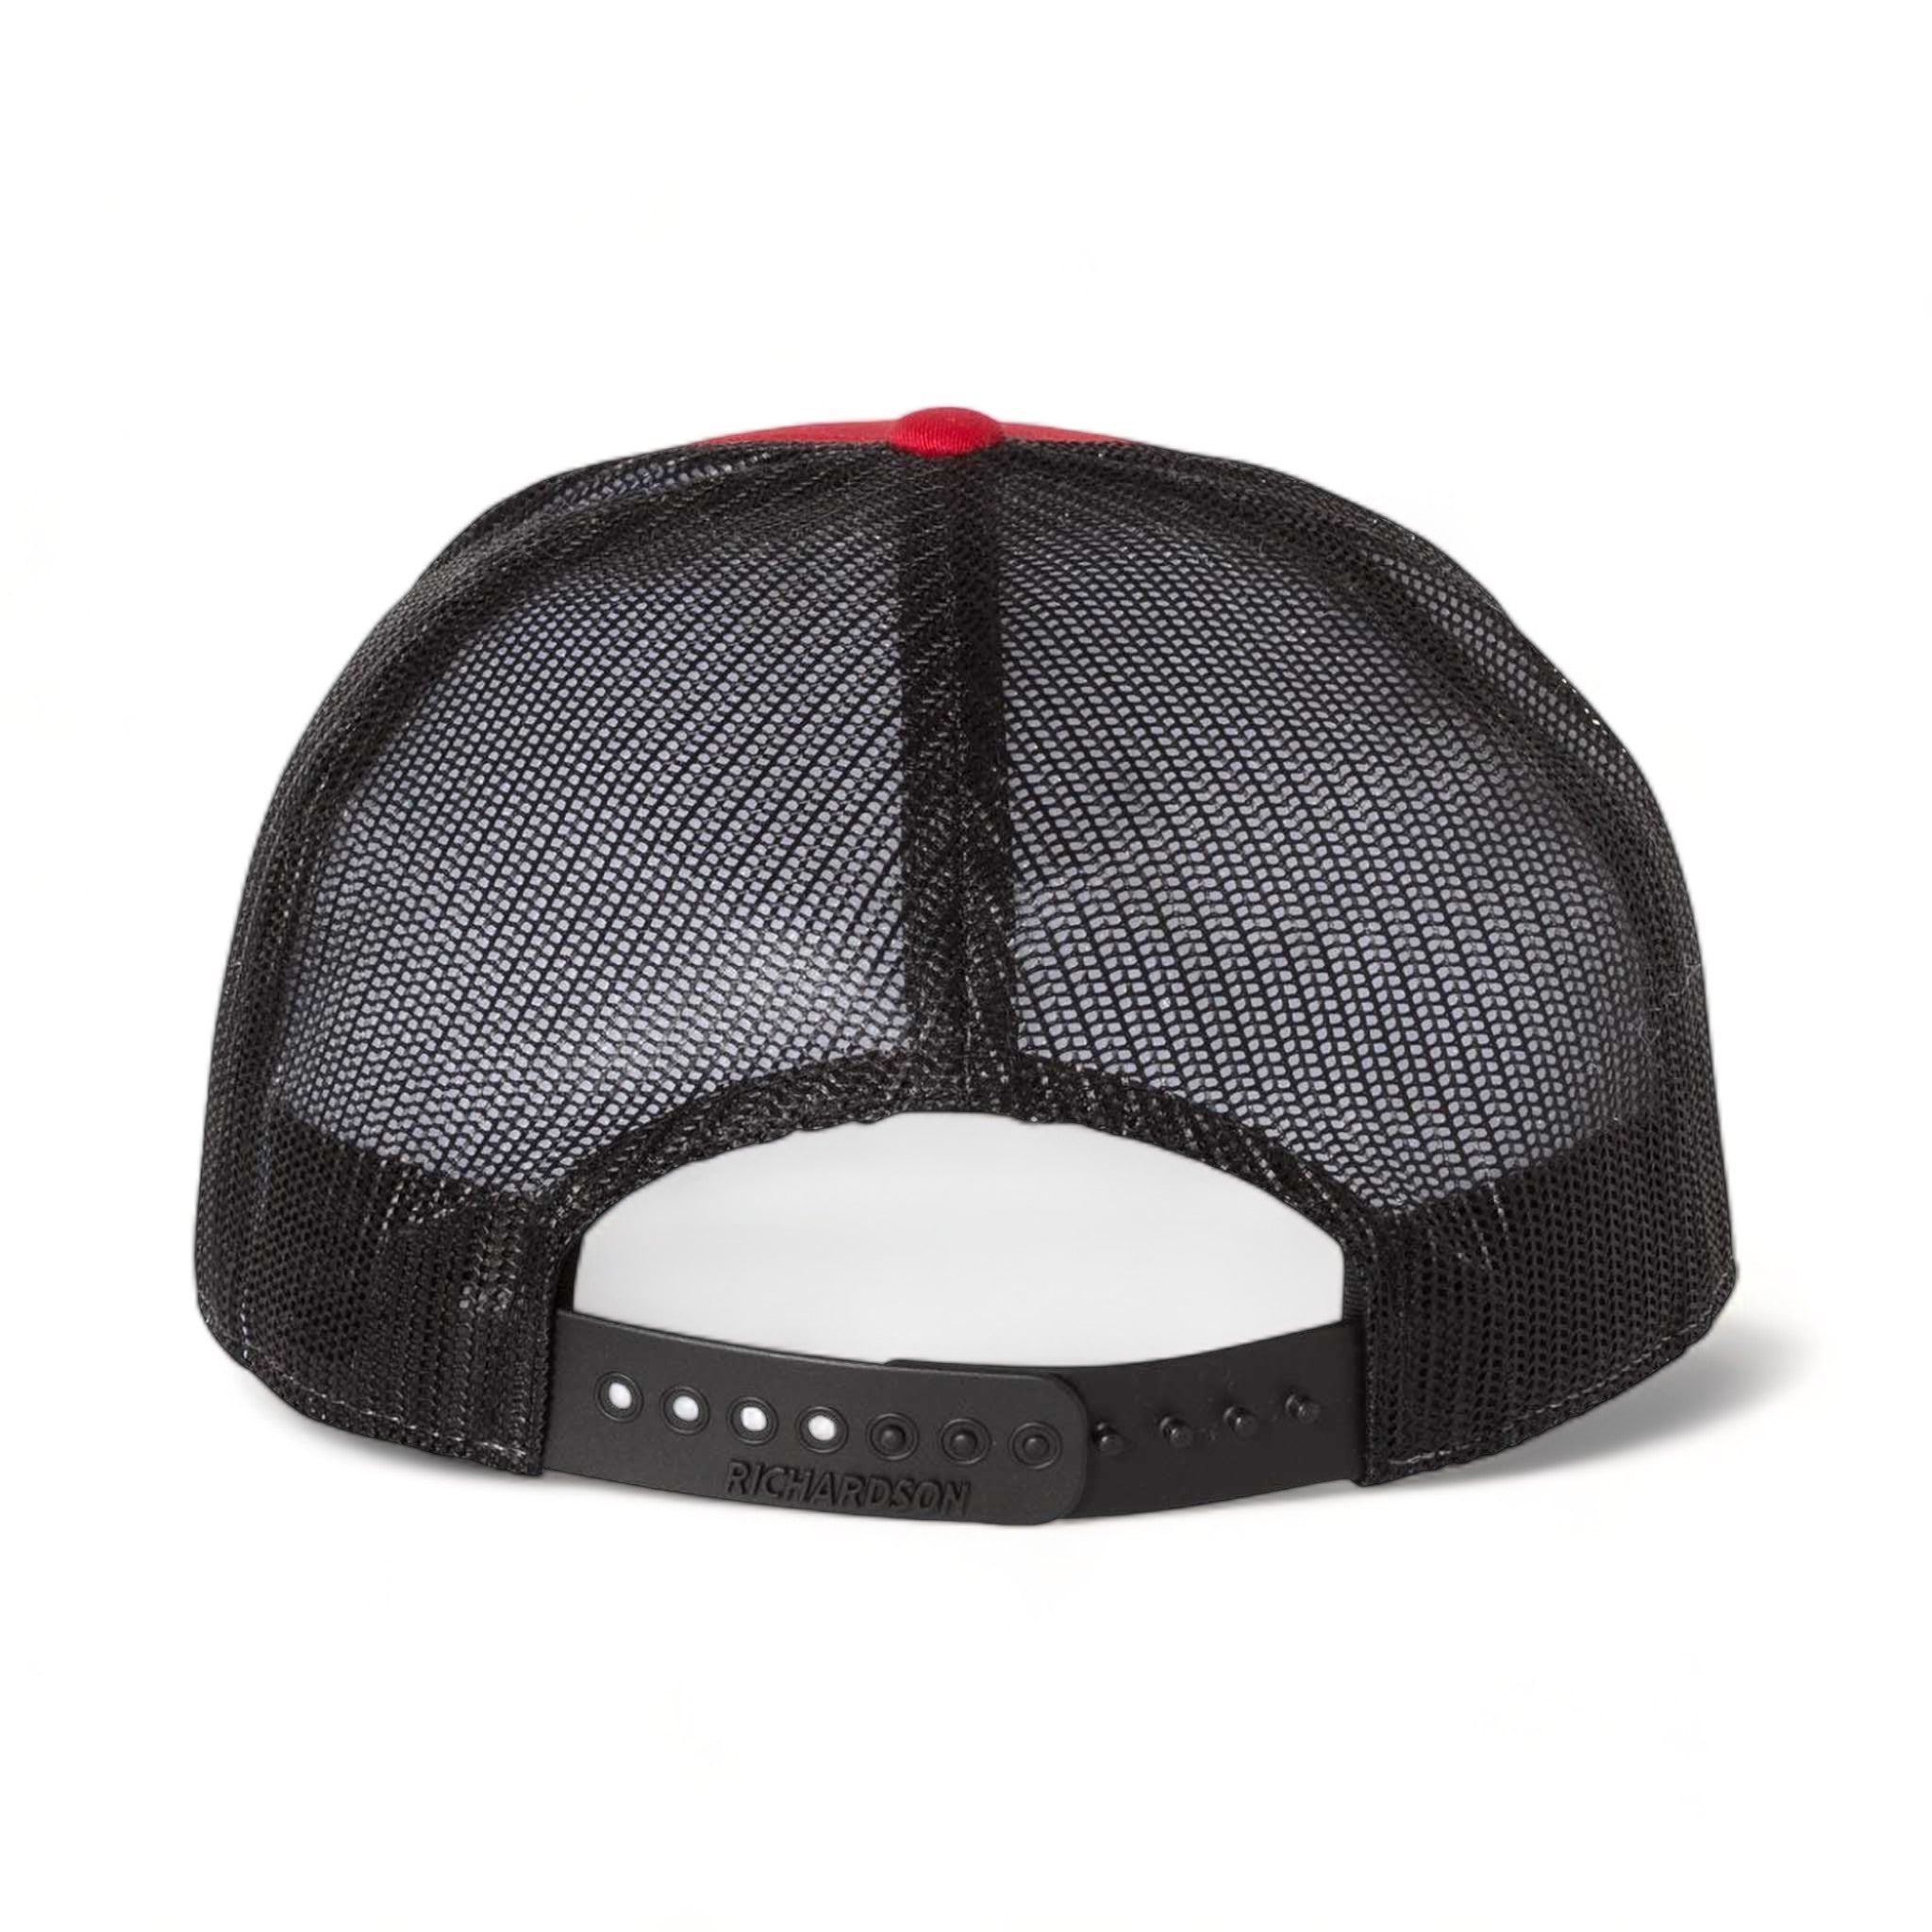 Back view of Richardson 168 custom hat in red and black